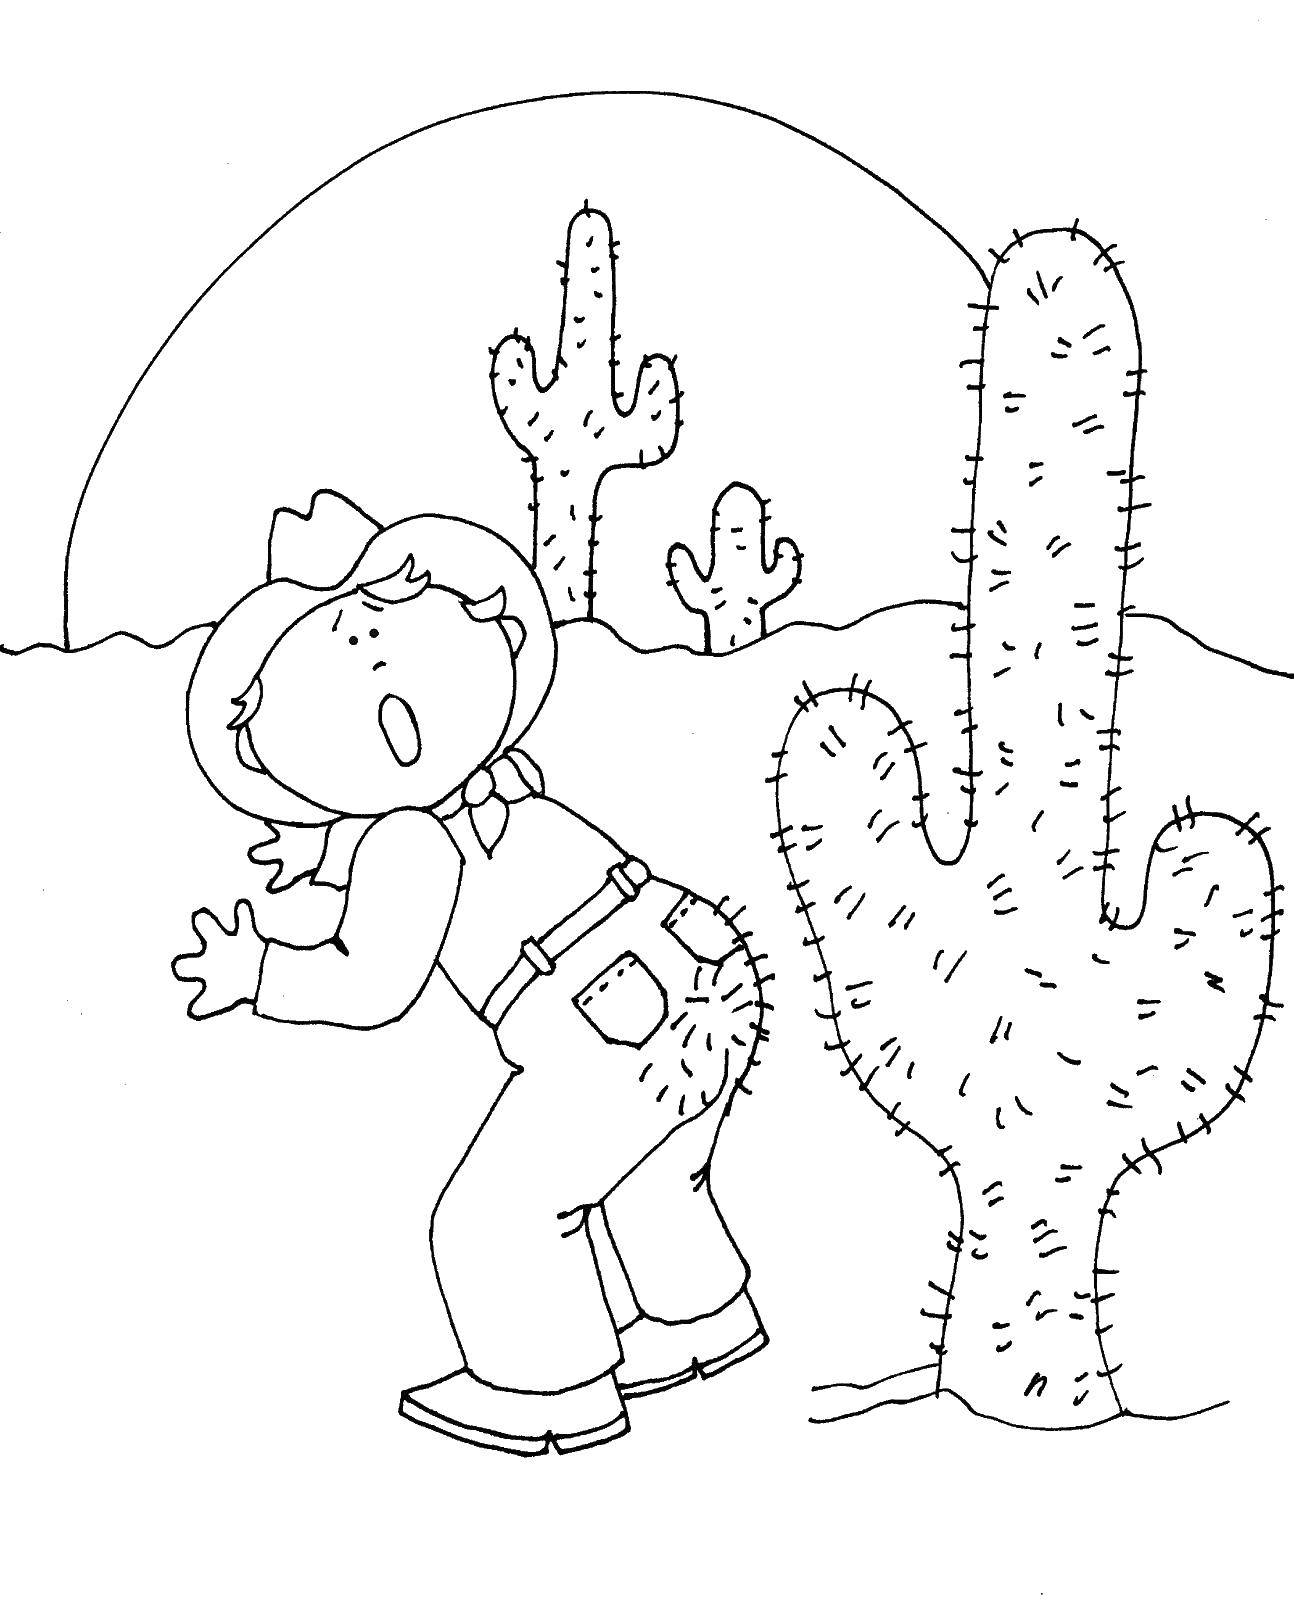 Coloring The cowboy and cactus. Category Cactus. Tags:  cacti, cabway, desert.